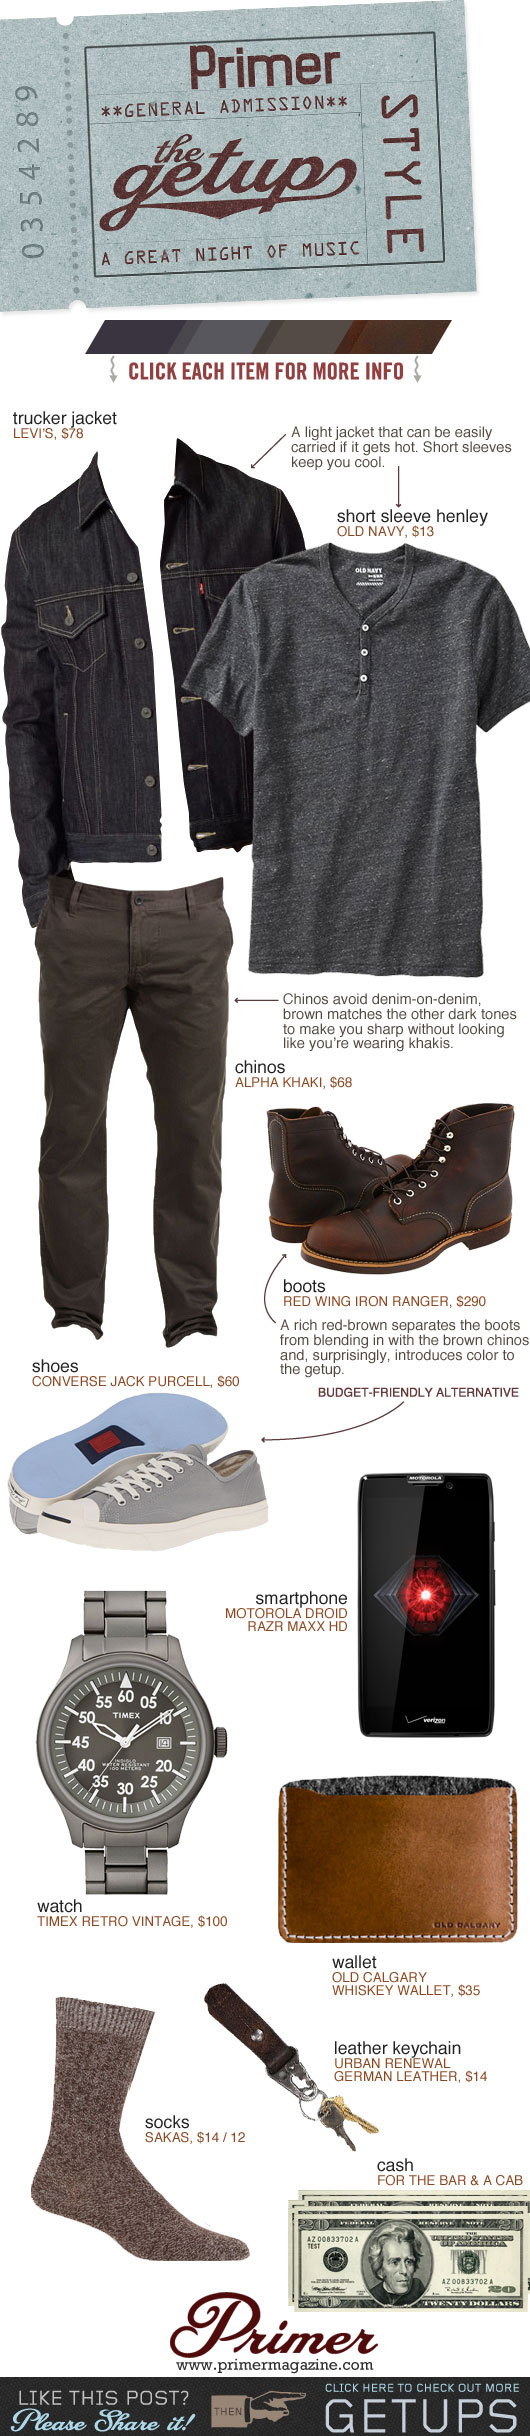 Getup A great Night of Music - Trucker jacket, gray henley, brown pants, iron ranger boots or sneakers